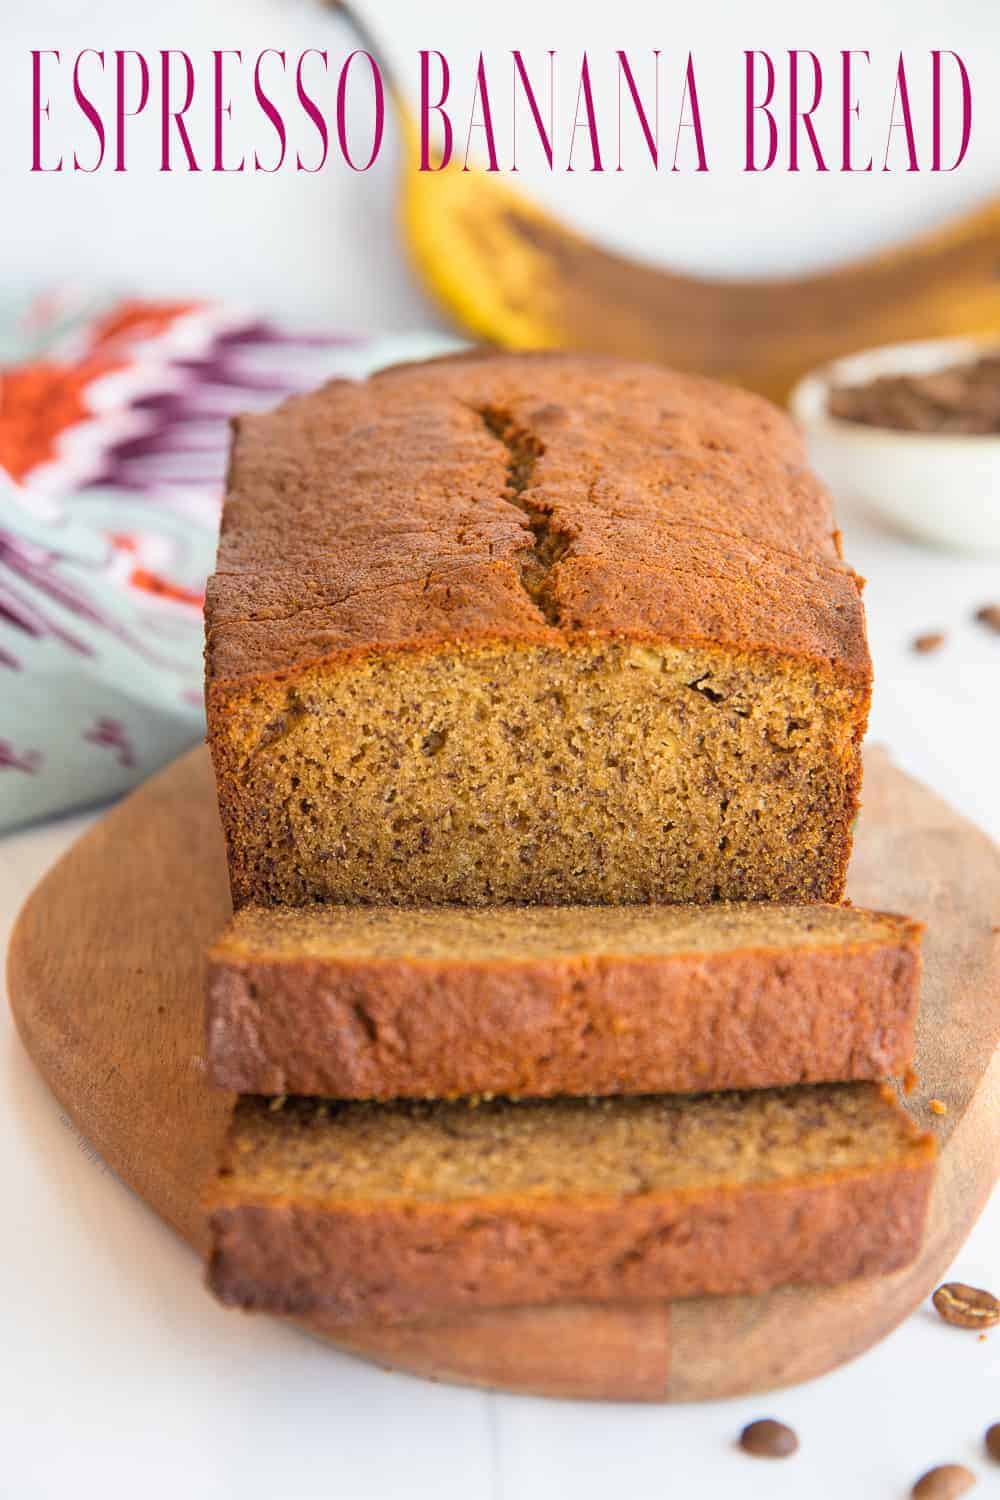 Banana Bread with Espresso gives you breakfast with a buzz. The mild bitterness of espresso cuts through the ripe sweet banana bread and creates a complex, yet comforting breakfast bread that your whole family will love. Moist and tender, this banana bread will soon become your favorite way to enjoy the recipe. #bananabread #bananabreadrecipe #coffee #espresso #baking #bakingbread #breadrecipe #quickbread #muffin #bananamuffins #breakfast #freezerfriendly #makeaheadrecipe via @ediblesense